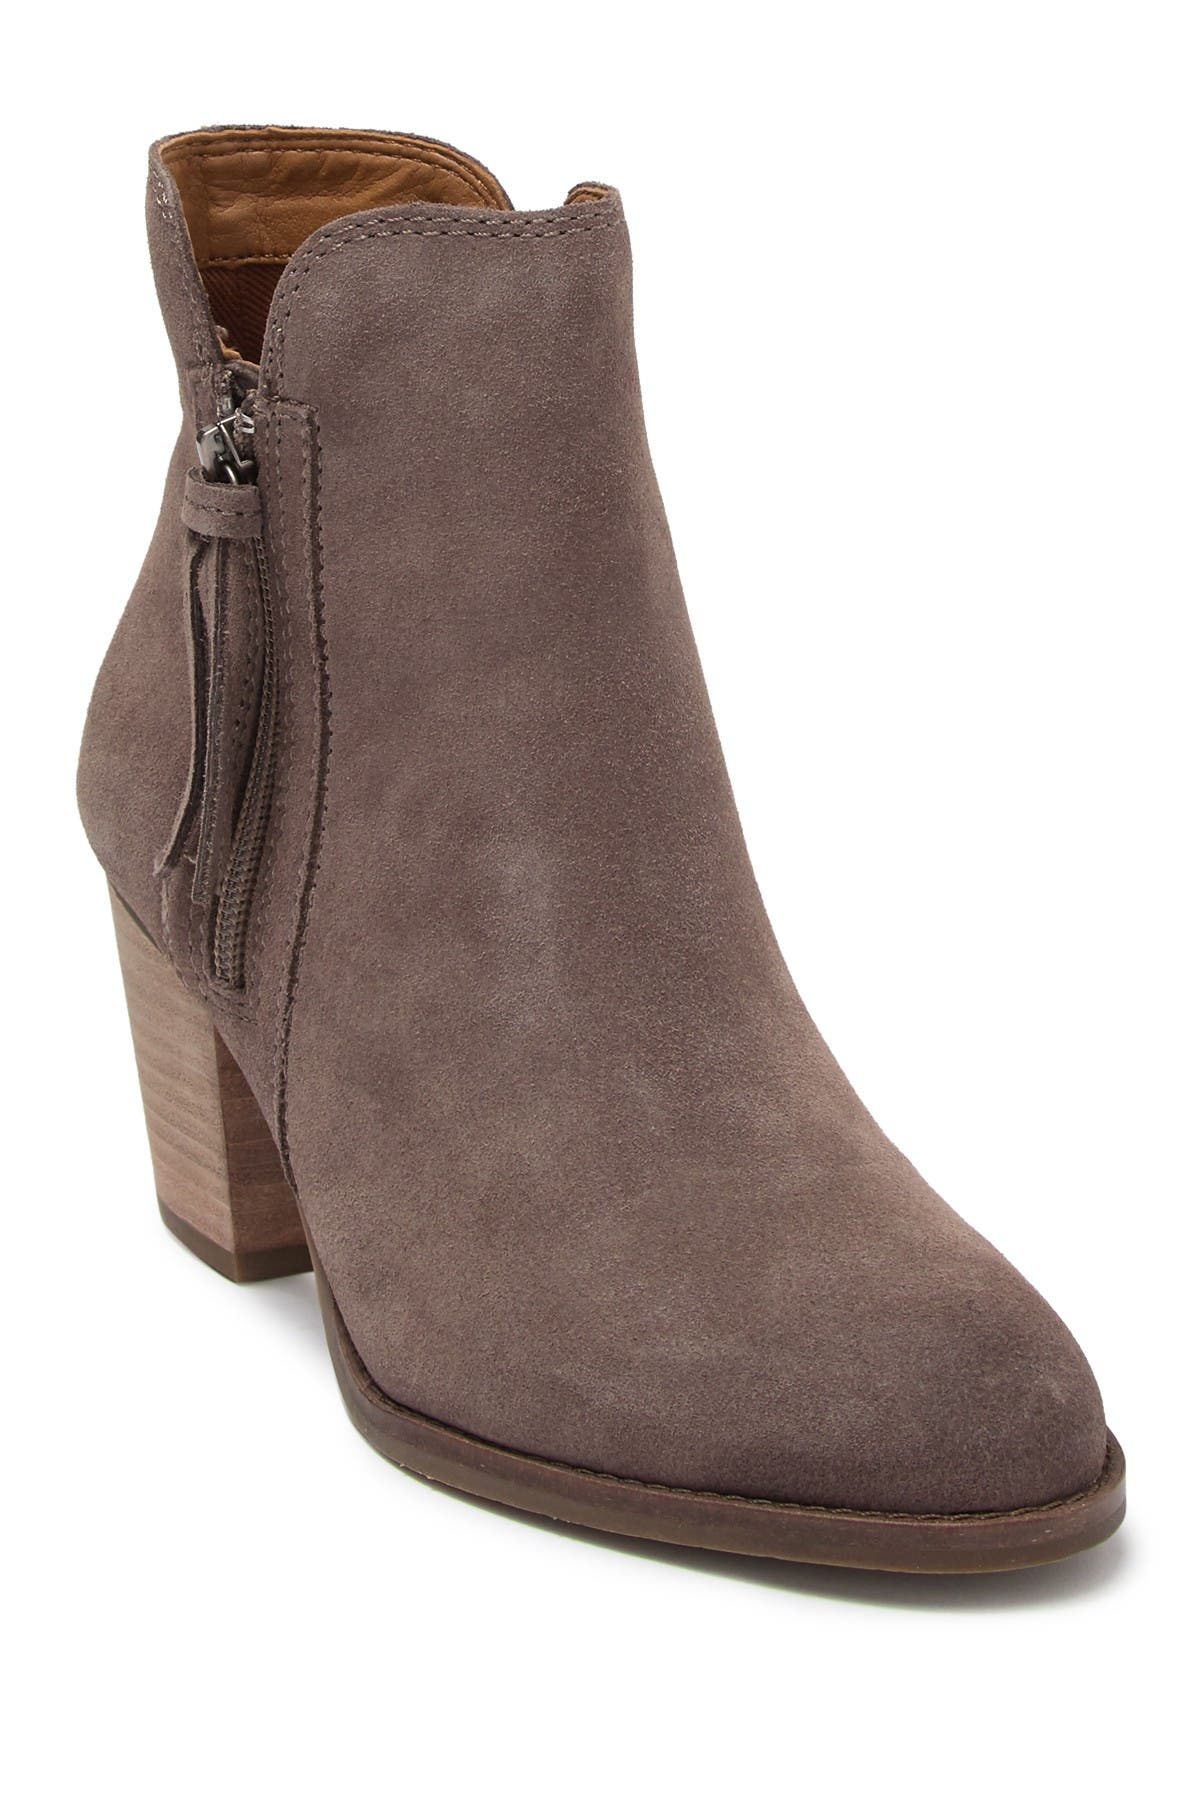 frye ankle boot